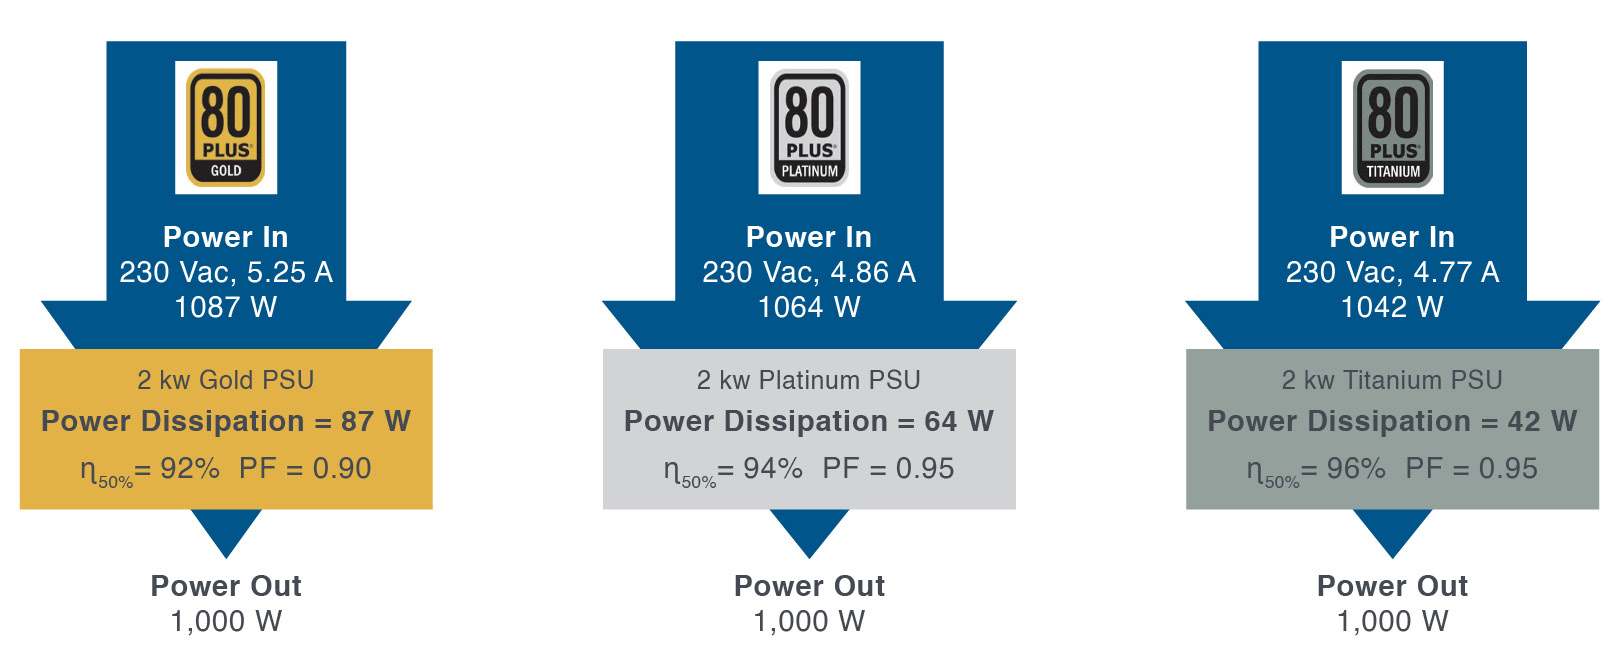 Comparison of power dissipation between platinum and titanium rated power supplies.